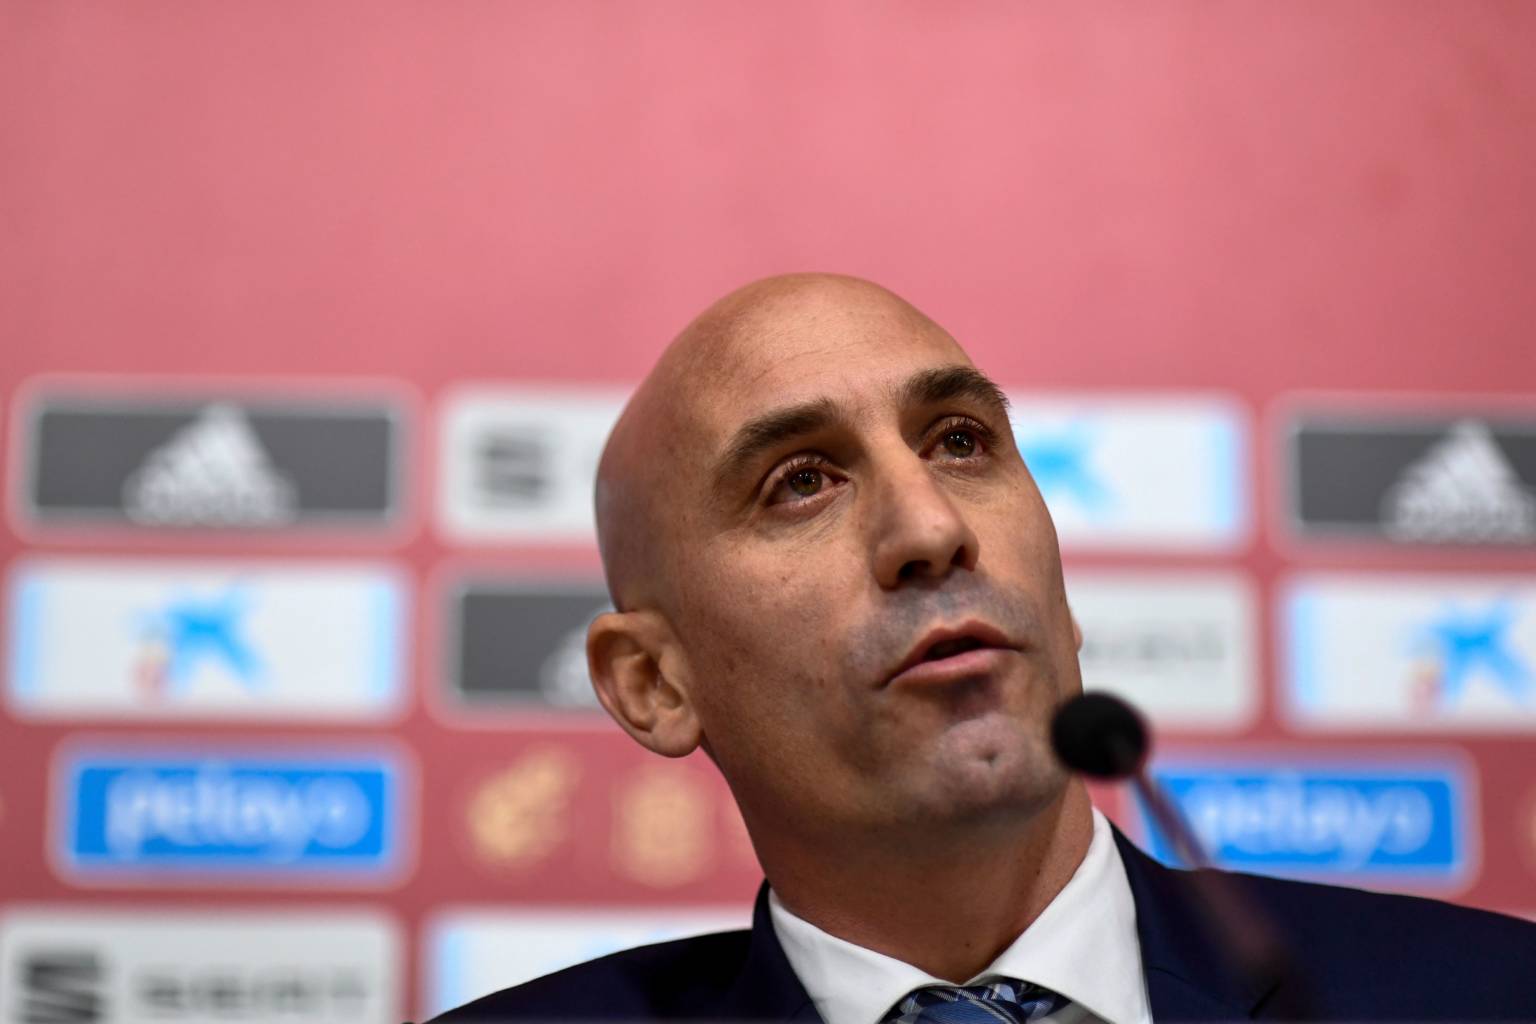 Spanish Royal Football Federation (RFEF) president Luis Rubiales gives a press conference on November 19, 2019 at Las Rozas football sports city near Madrid. - Luis Enrique will return as coach of Spain and replace Robert Moreno ahead of Euro 2020, the Spanish Football Federation (RFEF) confirmed on November 19, 2019. Moreno took charge in June after Luis Enrique had resigned to take care of his daughter Xana, who died in August of bone cancer. "Today we can confirm Luis Enrique returns to his position of work," said RFEF president Luis Rubiales, in a press conference at the national team's training base in Las Rozas. (Photo by OSCAR DEL POZO / AFP) (Photo by OSCAR DEL POZO/AFP via Getty Images)